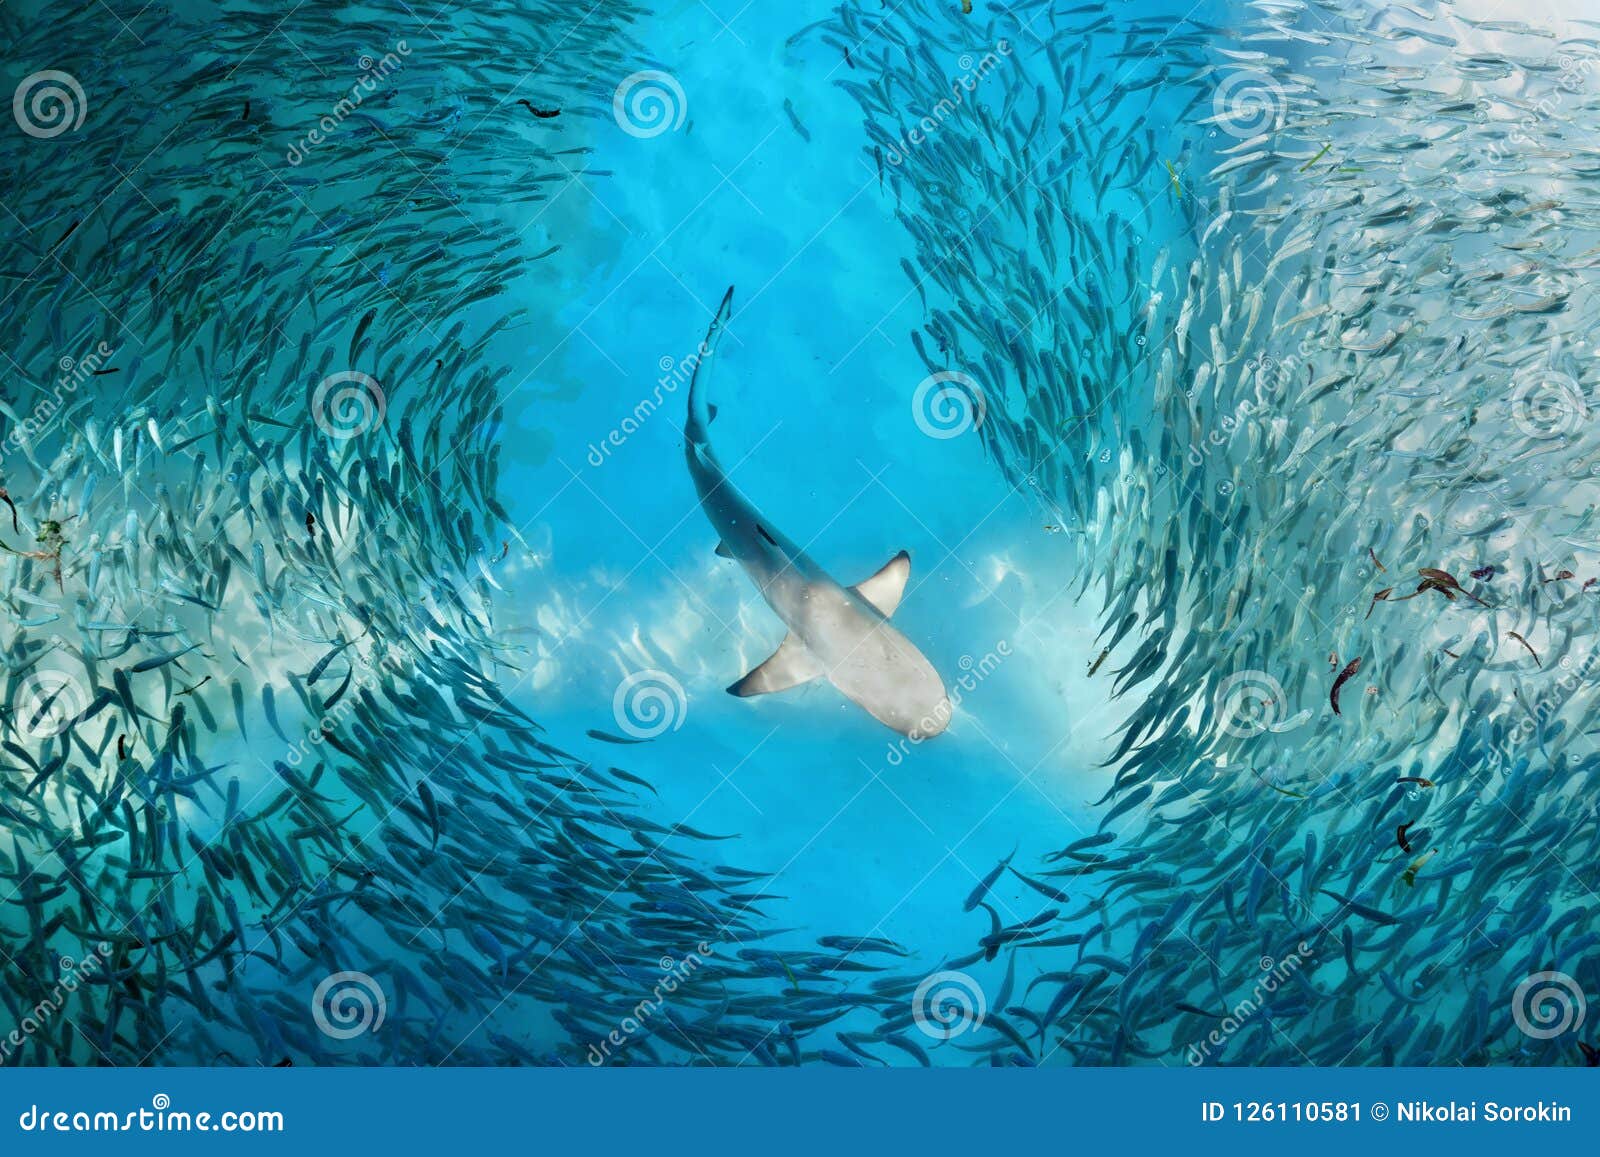 shark and small fishes in ocean